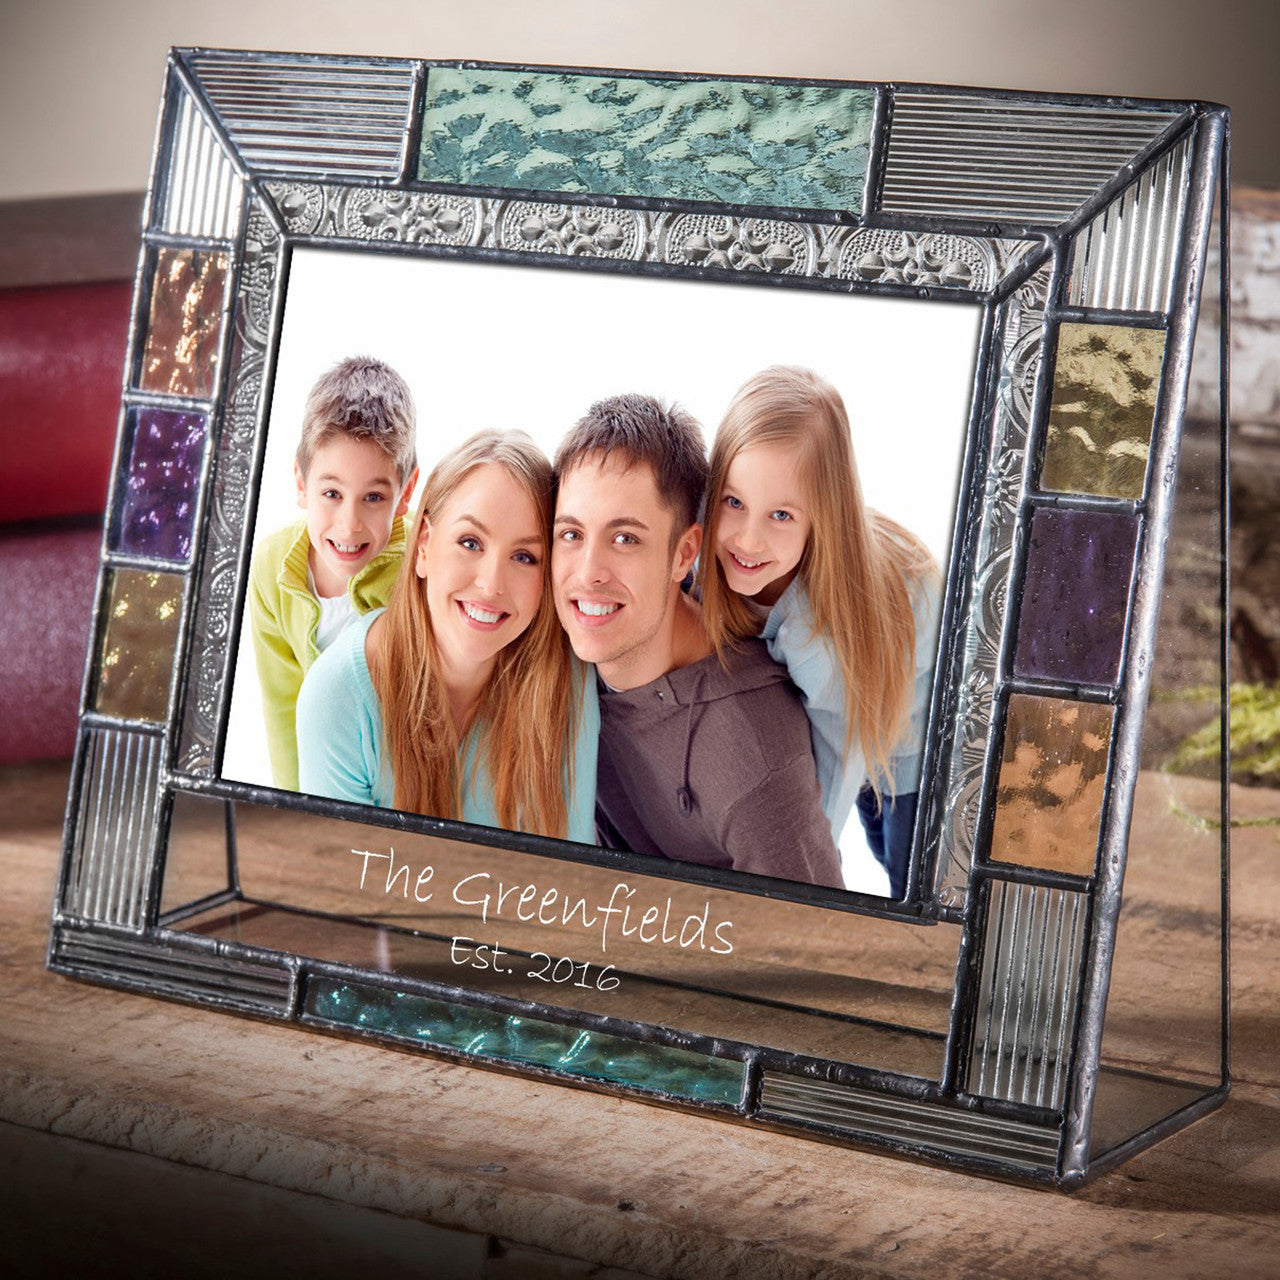 Family Picture Frame Colorful Stained Glass Multiple Sizes Personalized Gift for Mom Dad Grandparents Brother Sister Pic 391 EP639 Series